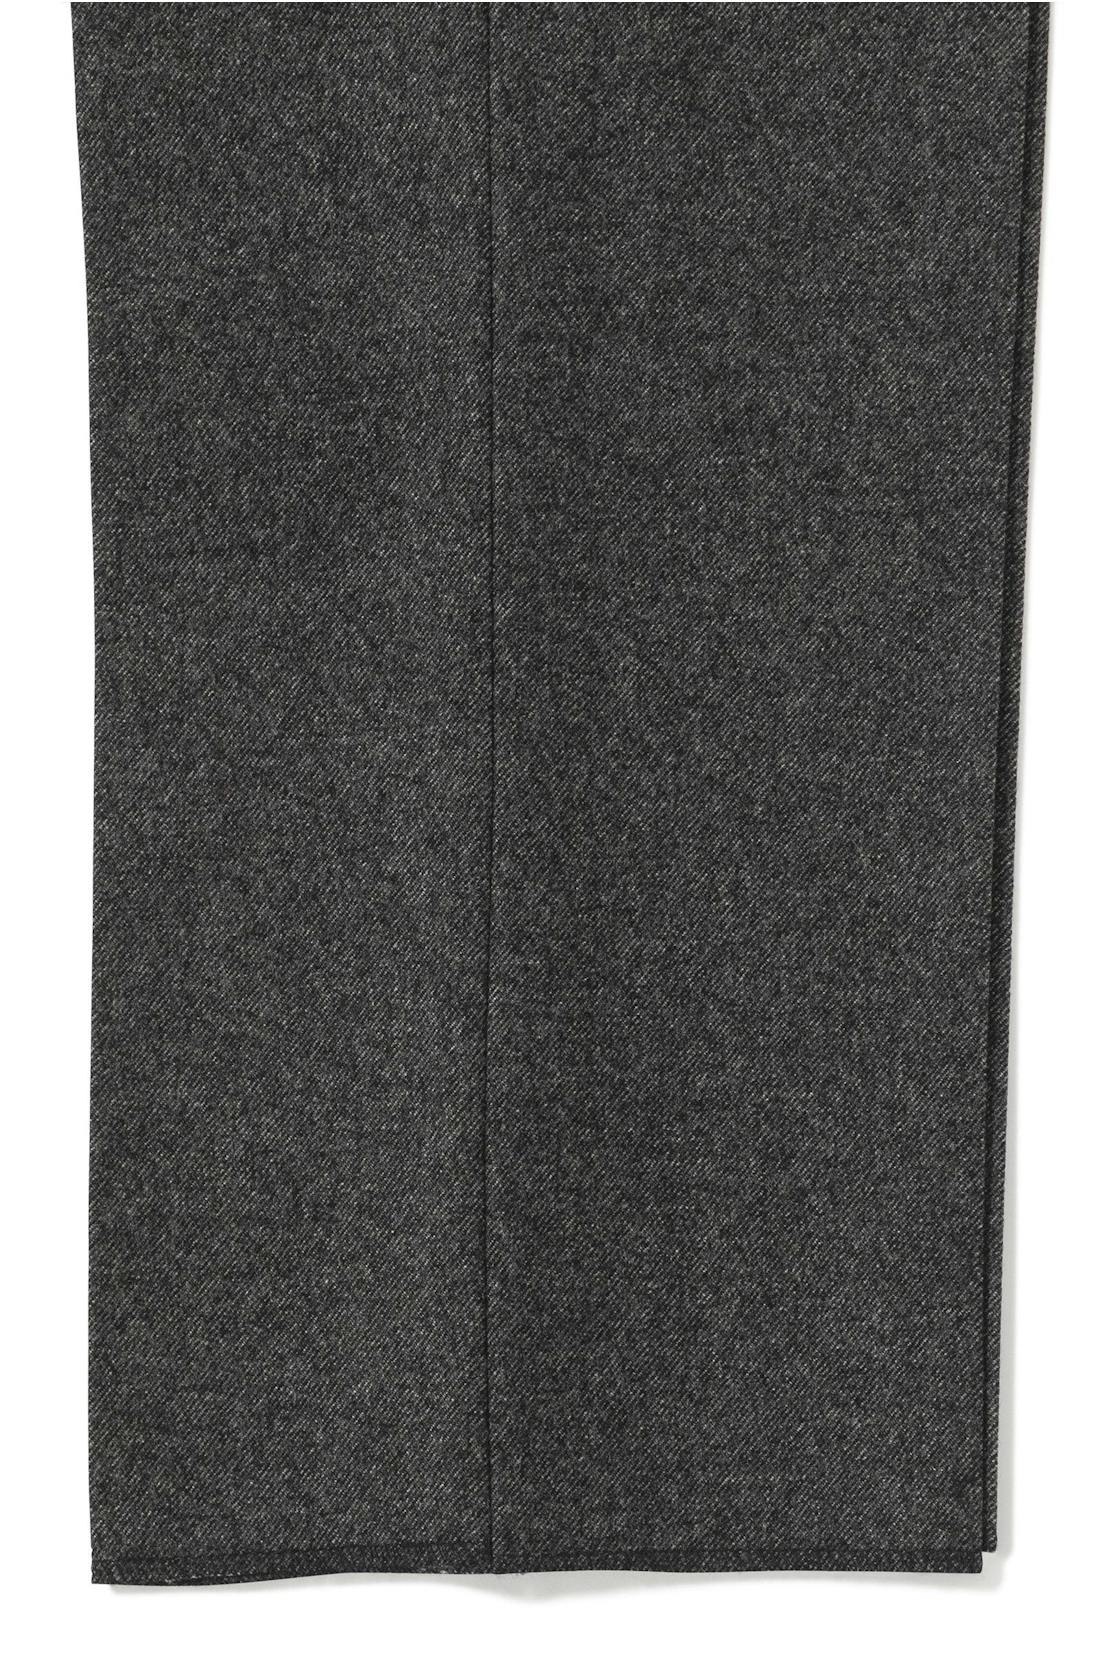 The Armoury by Osaku Charcoal Melange 3-ply Worsted Flannel Pleated CO Trousers